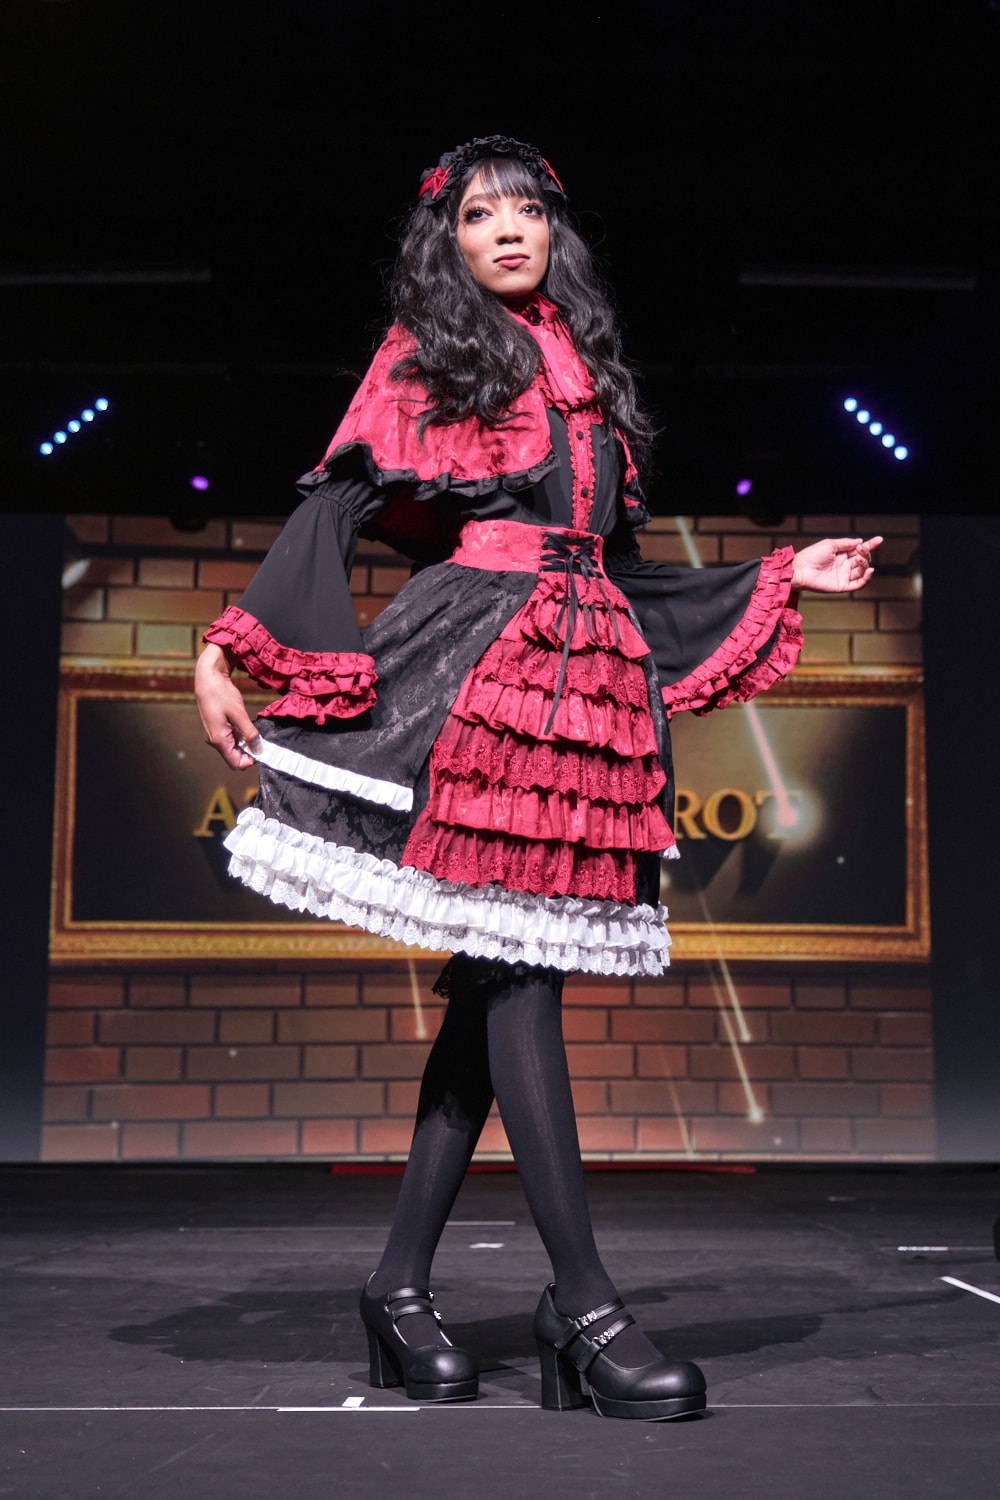 Atelier Pierrot gothic lolita model wearing black, red, and white collaboration set of a capelet, blouse, and skirt set - full body standing pose 2.